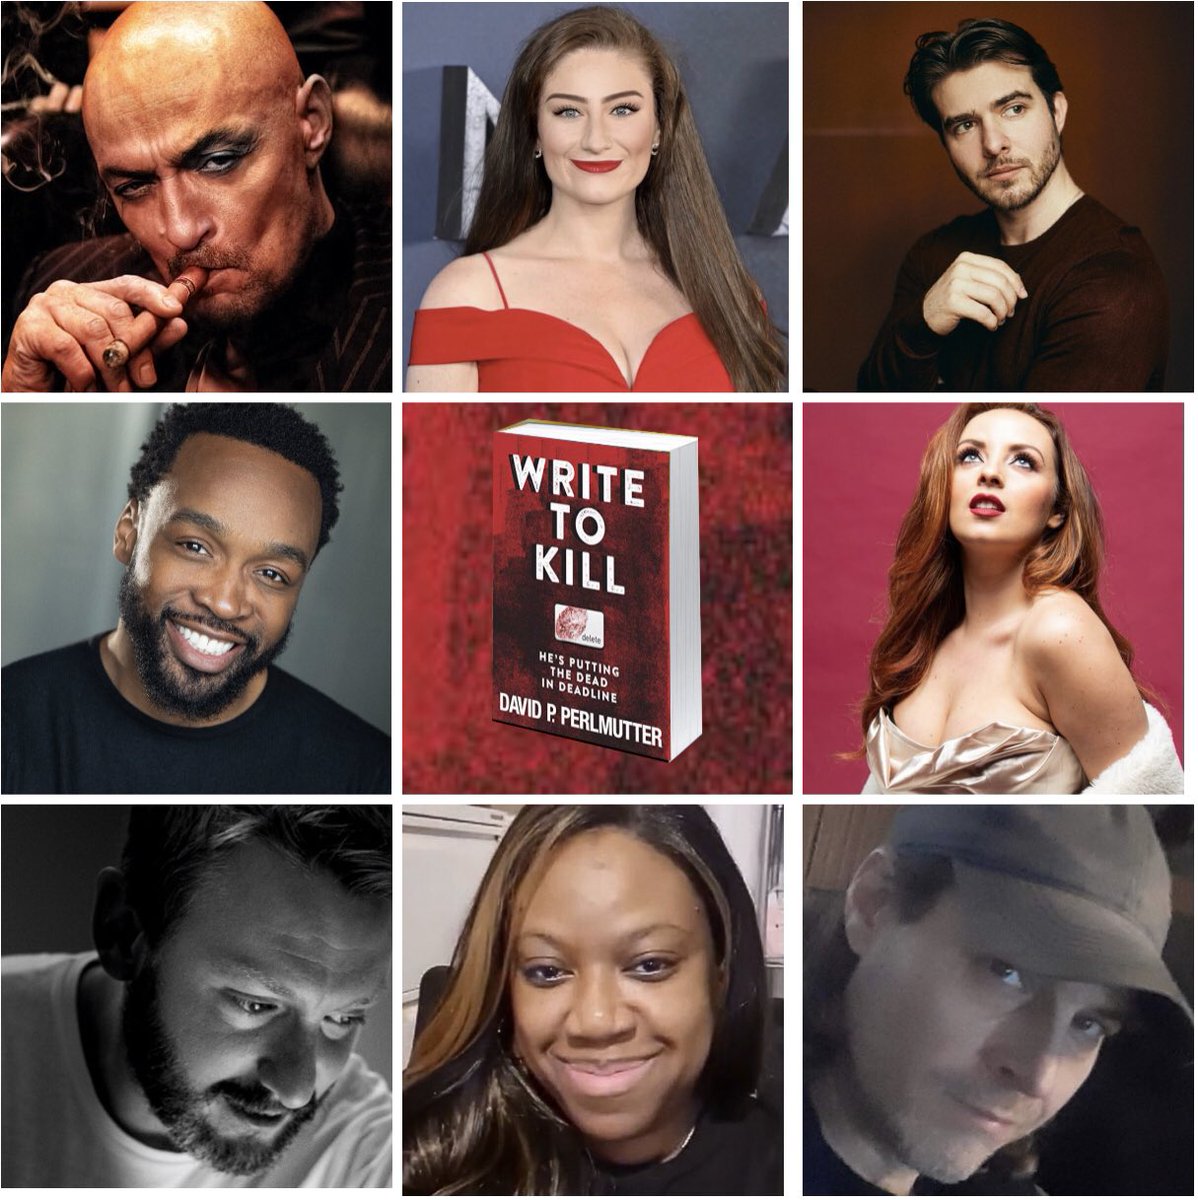 @Elitelizzard To coincide with the launch of the @Kickstarter 🔗  kickstarter.com/projects/david… funding campaign to make a #TVPilot with this talented cast and crew (FANTASTIC rewards to be involved), #WriteToKill with over 700 pages is #FREE to #download NOW and over the #bankholidayweekend, Amazon…